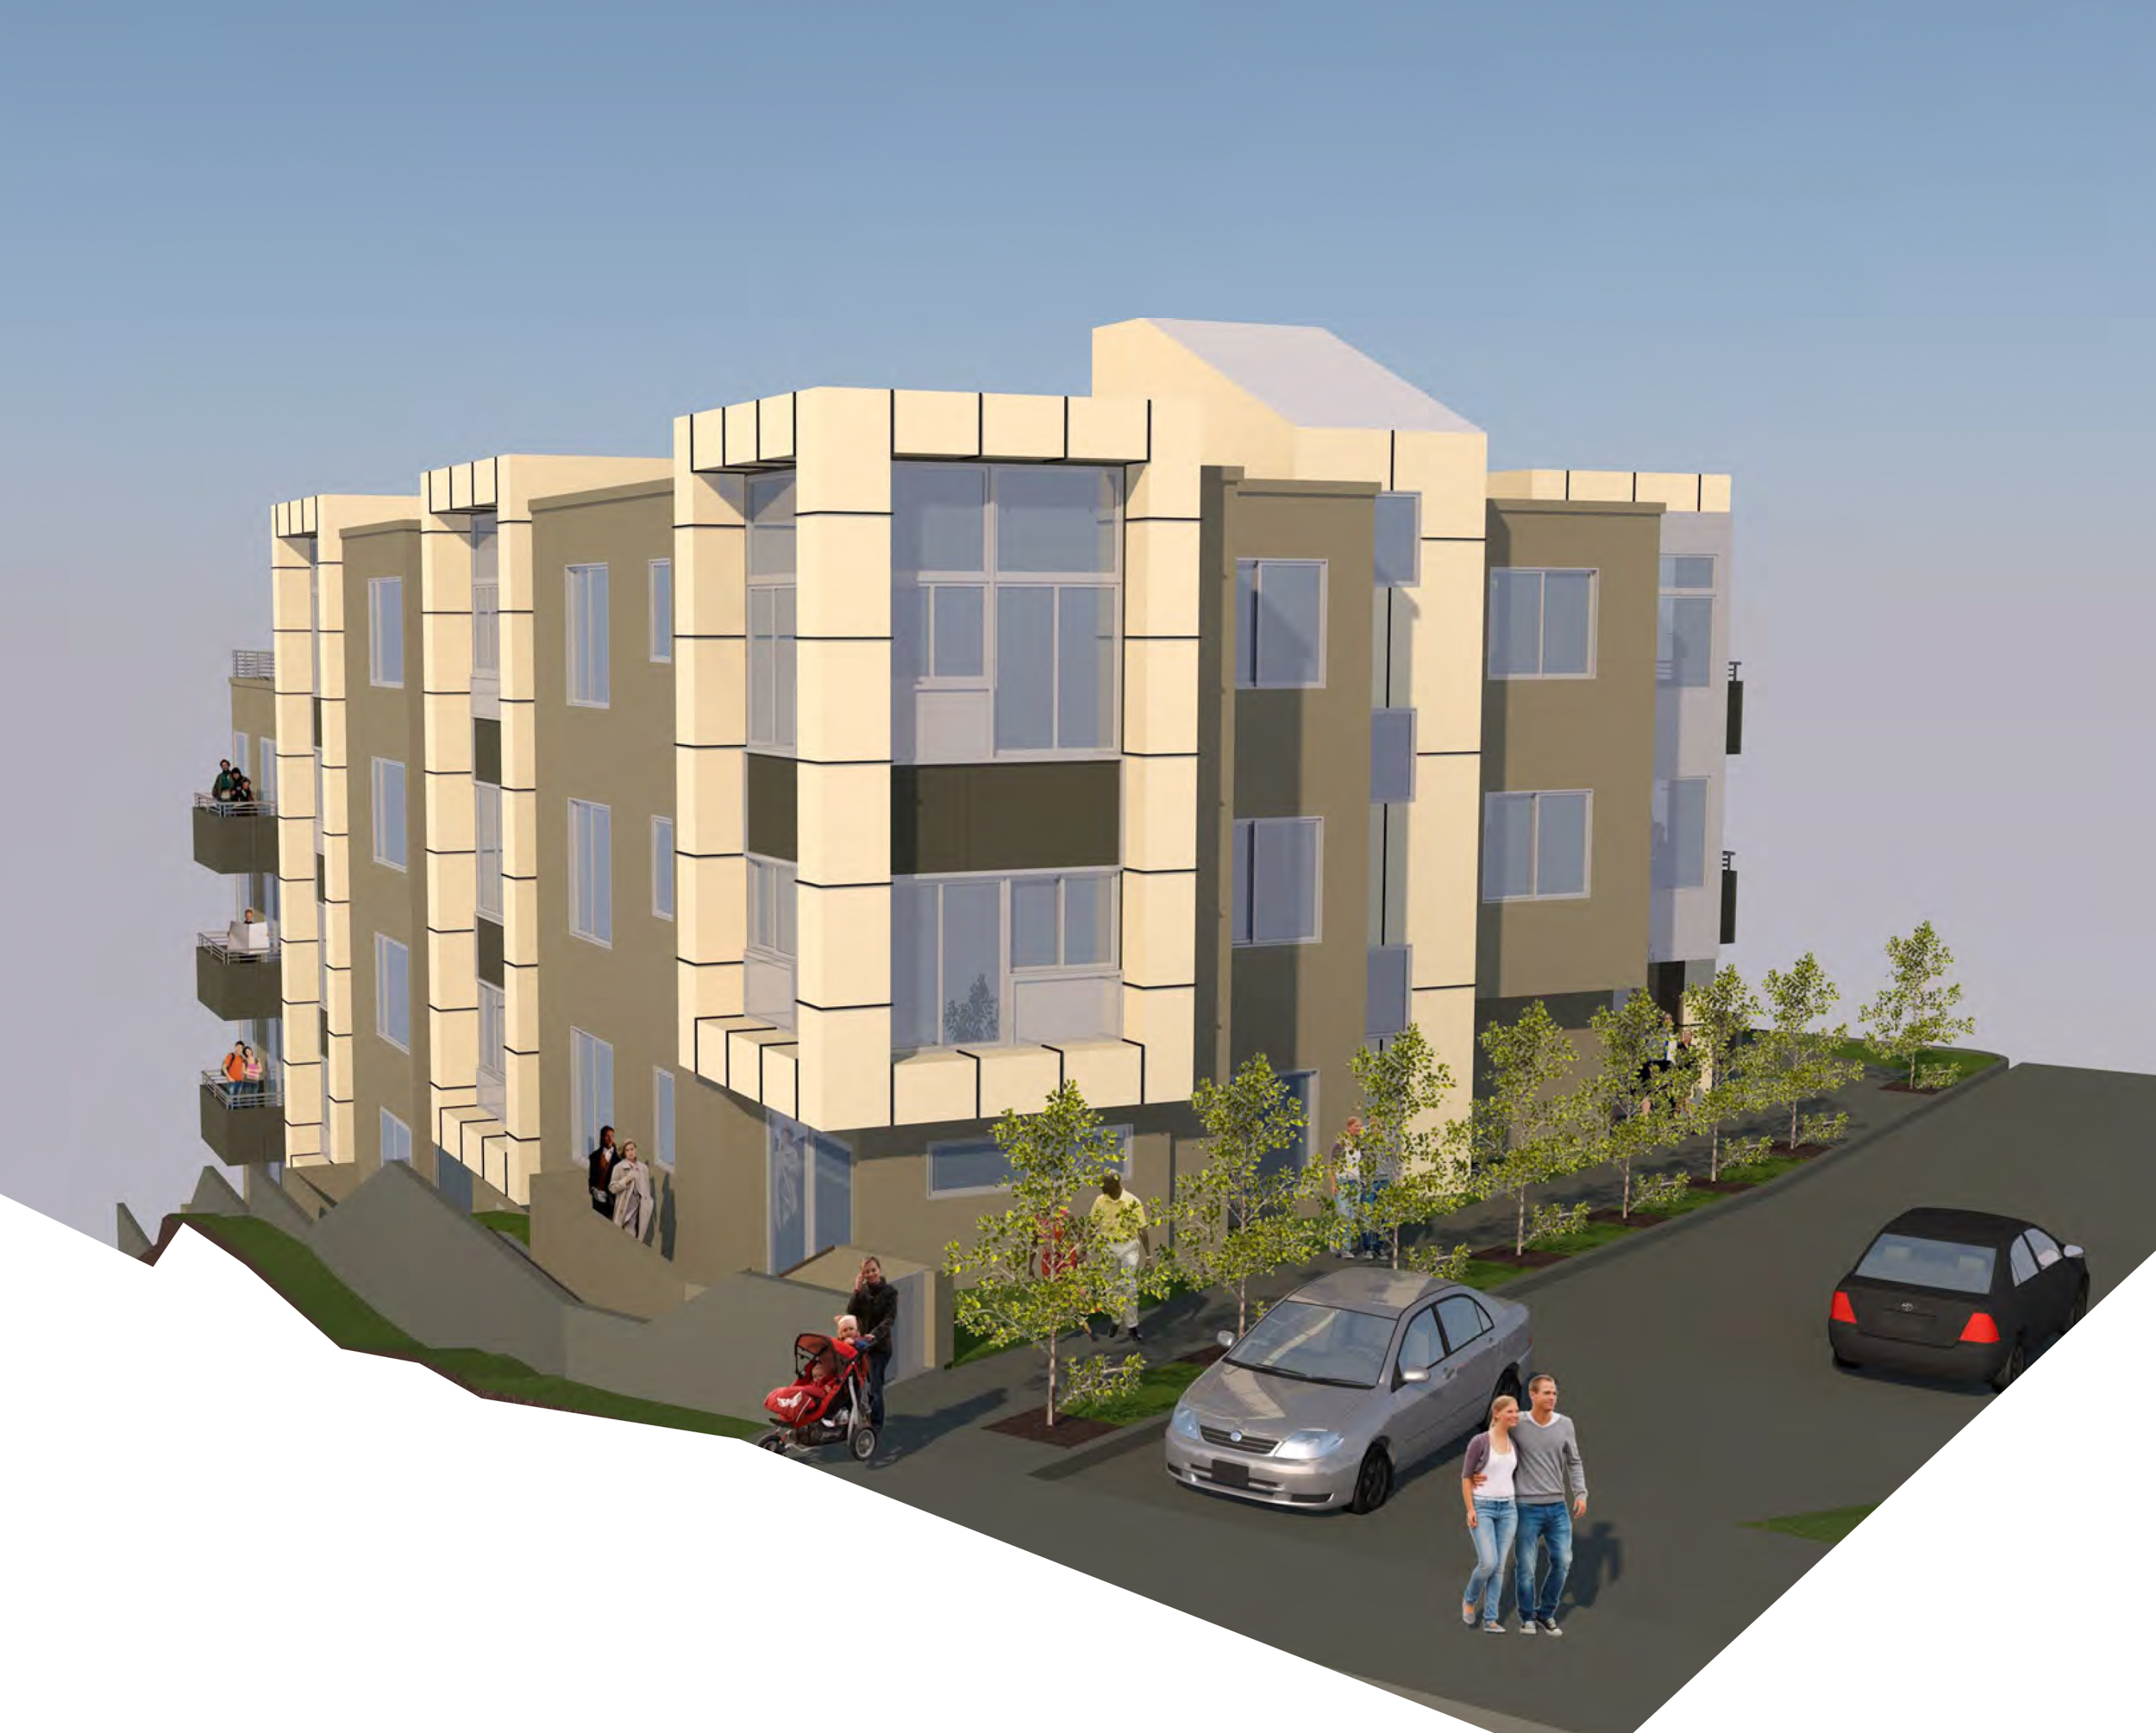 1700 Egbert Avenue affordable housing hero view, rendering by Kotas and Pantaleoni Architects